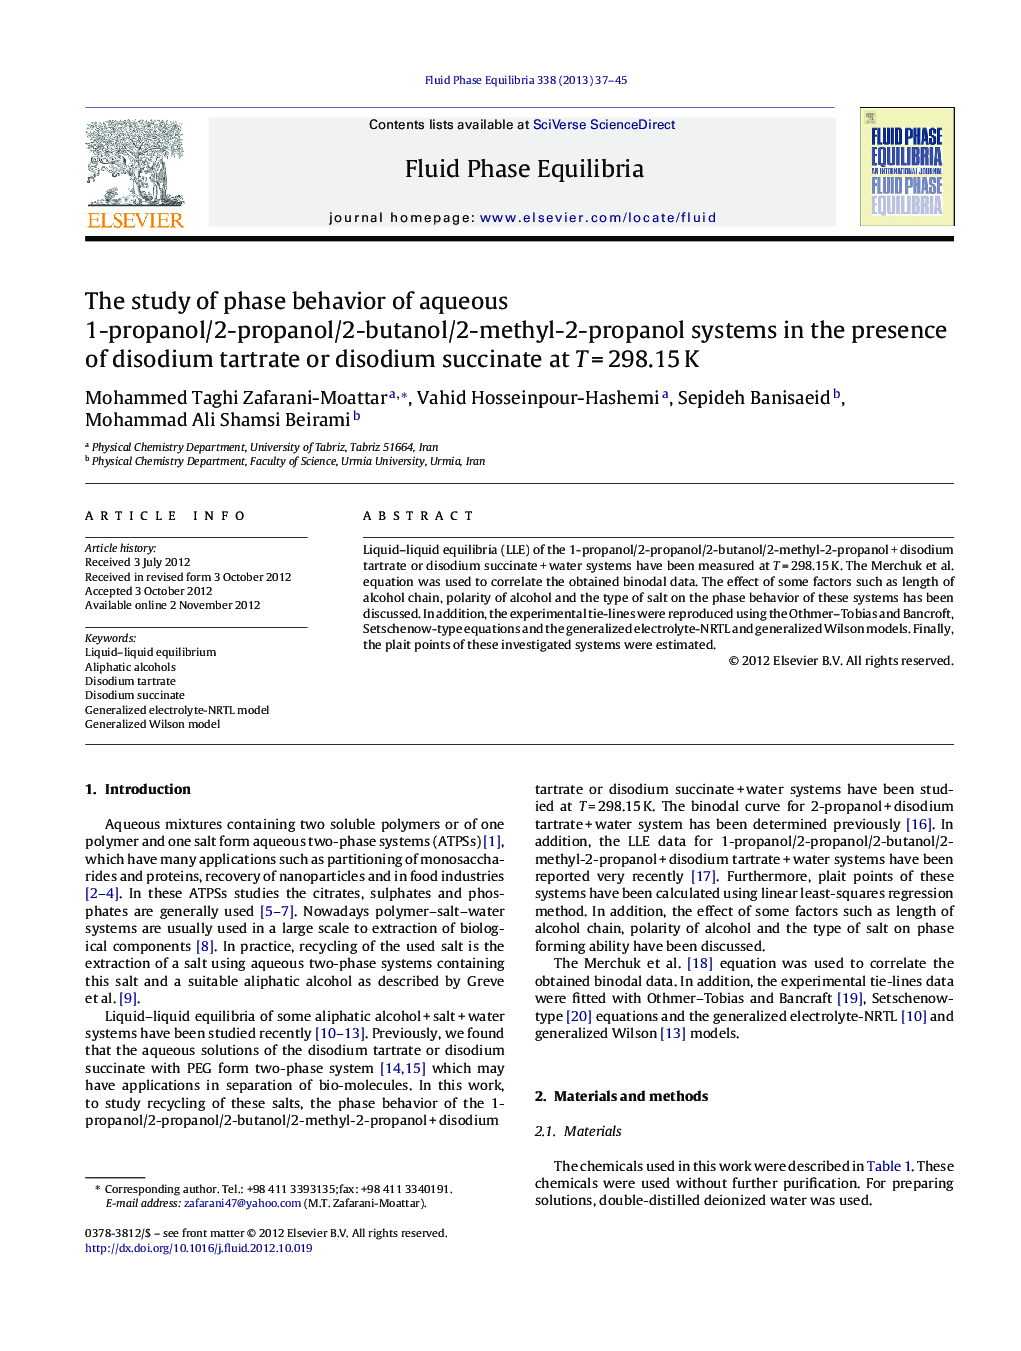 The study of phase behavior of aqueous 1-propanol/2-propanol/2-butanol/2-methyl-2-propanol systems in the presence of disodium tartrate or disodium succinate at T = 298.15 K